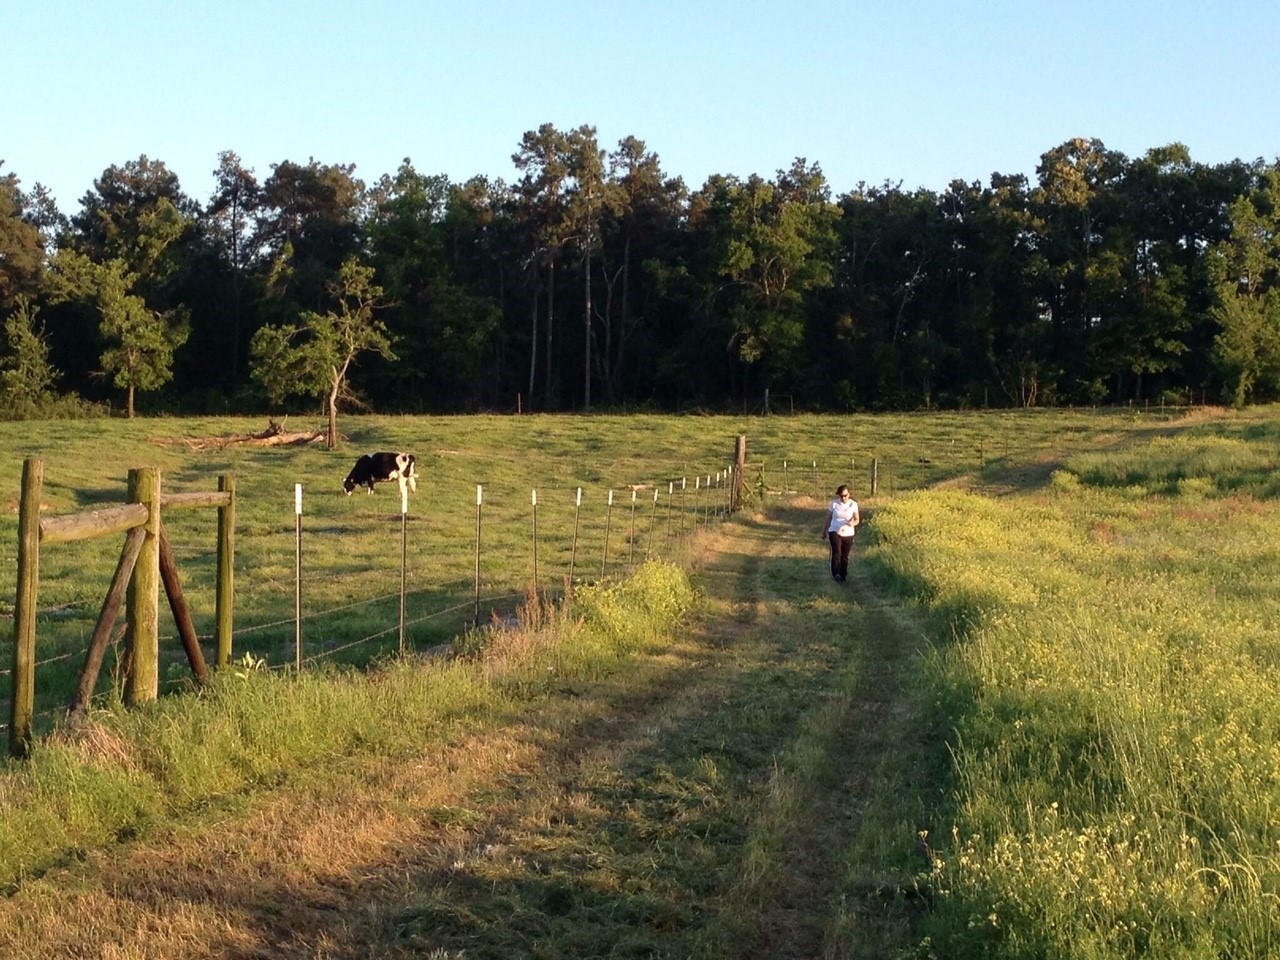 Runner passes cow in pasture trail race